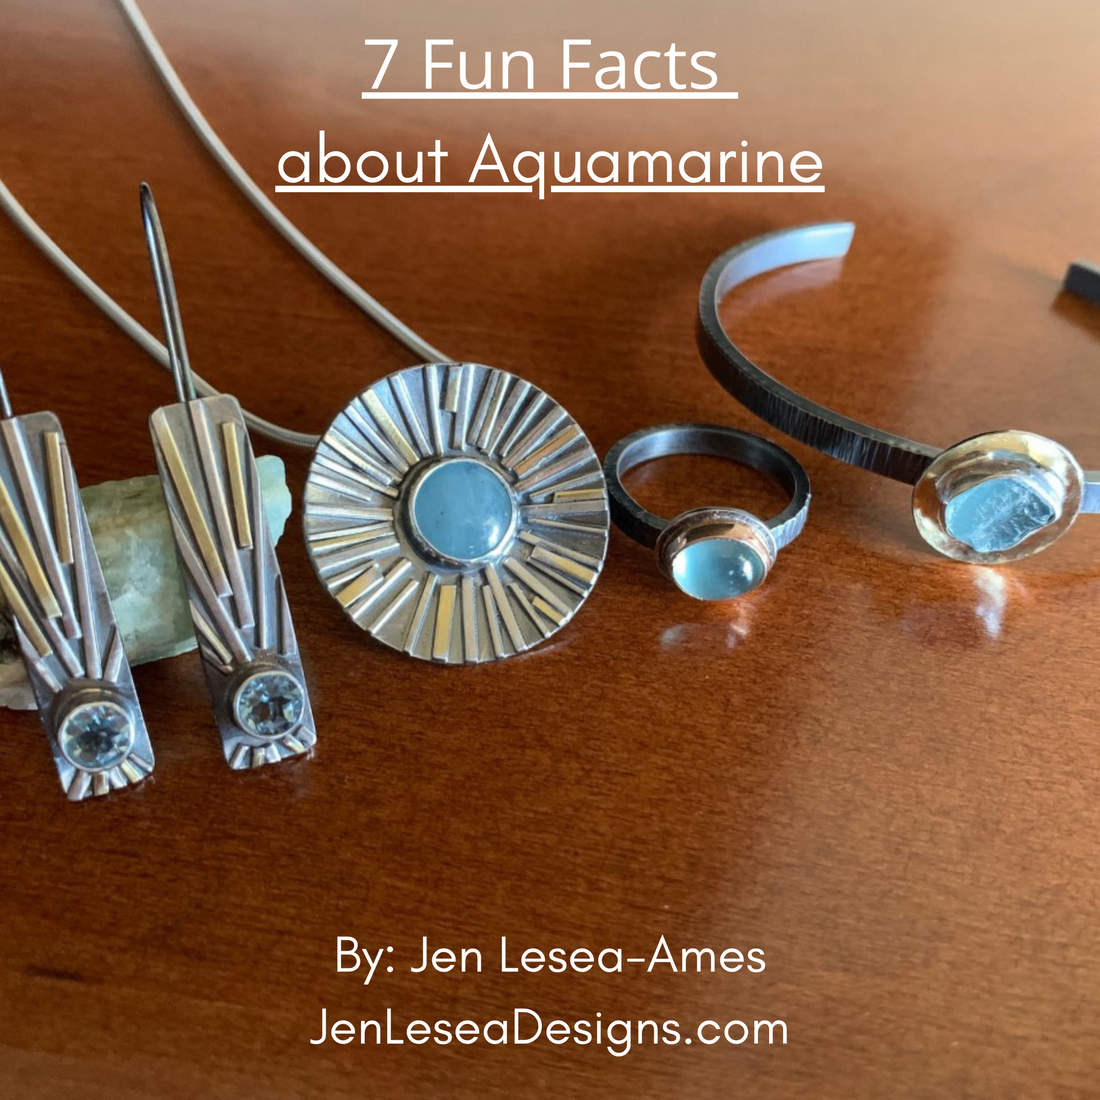 One-of-a-kind aquamarine jewelry by Jen Lesea Designs